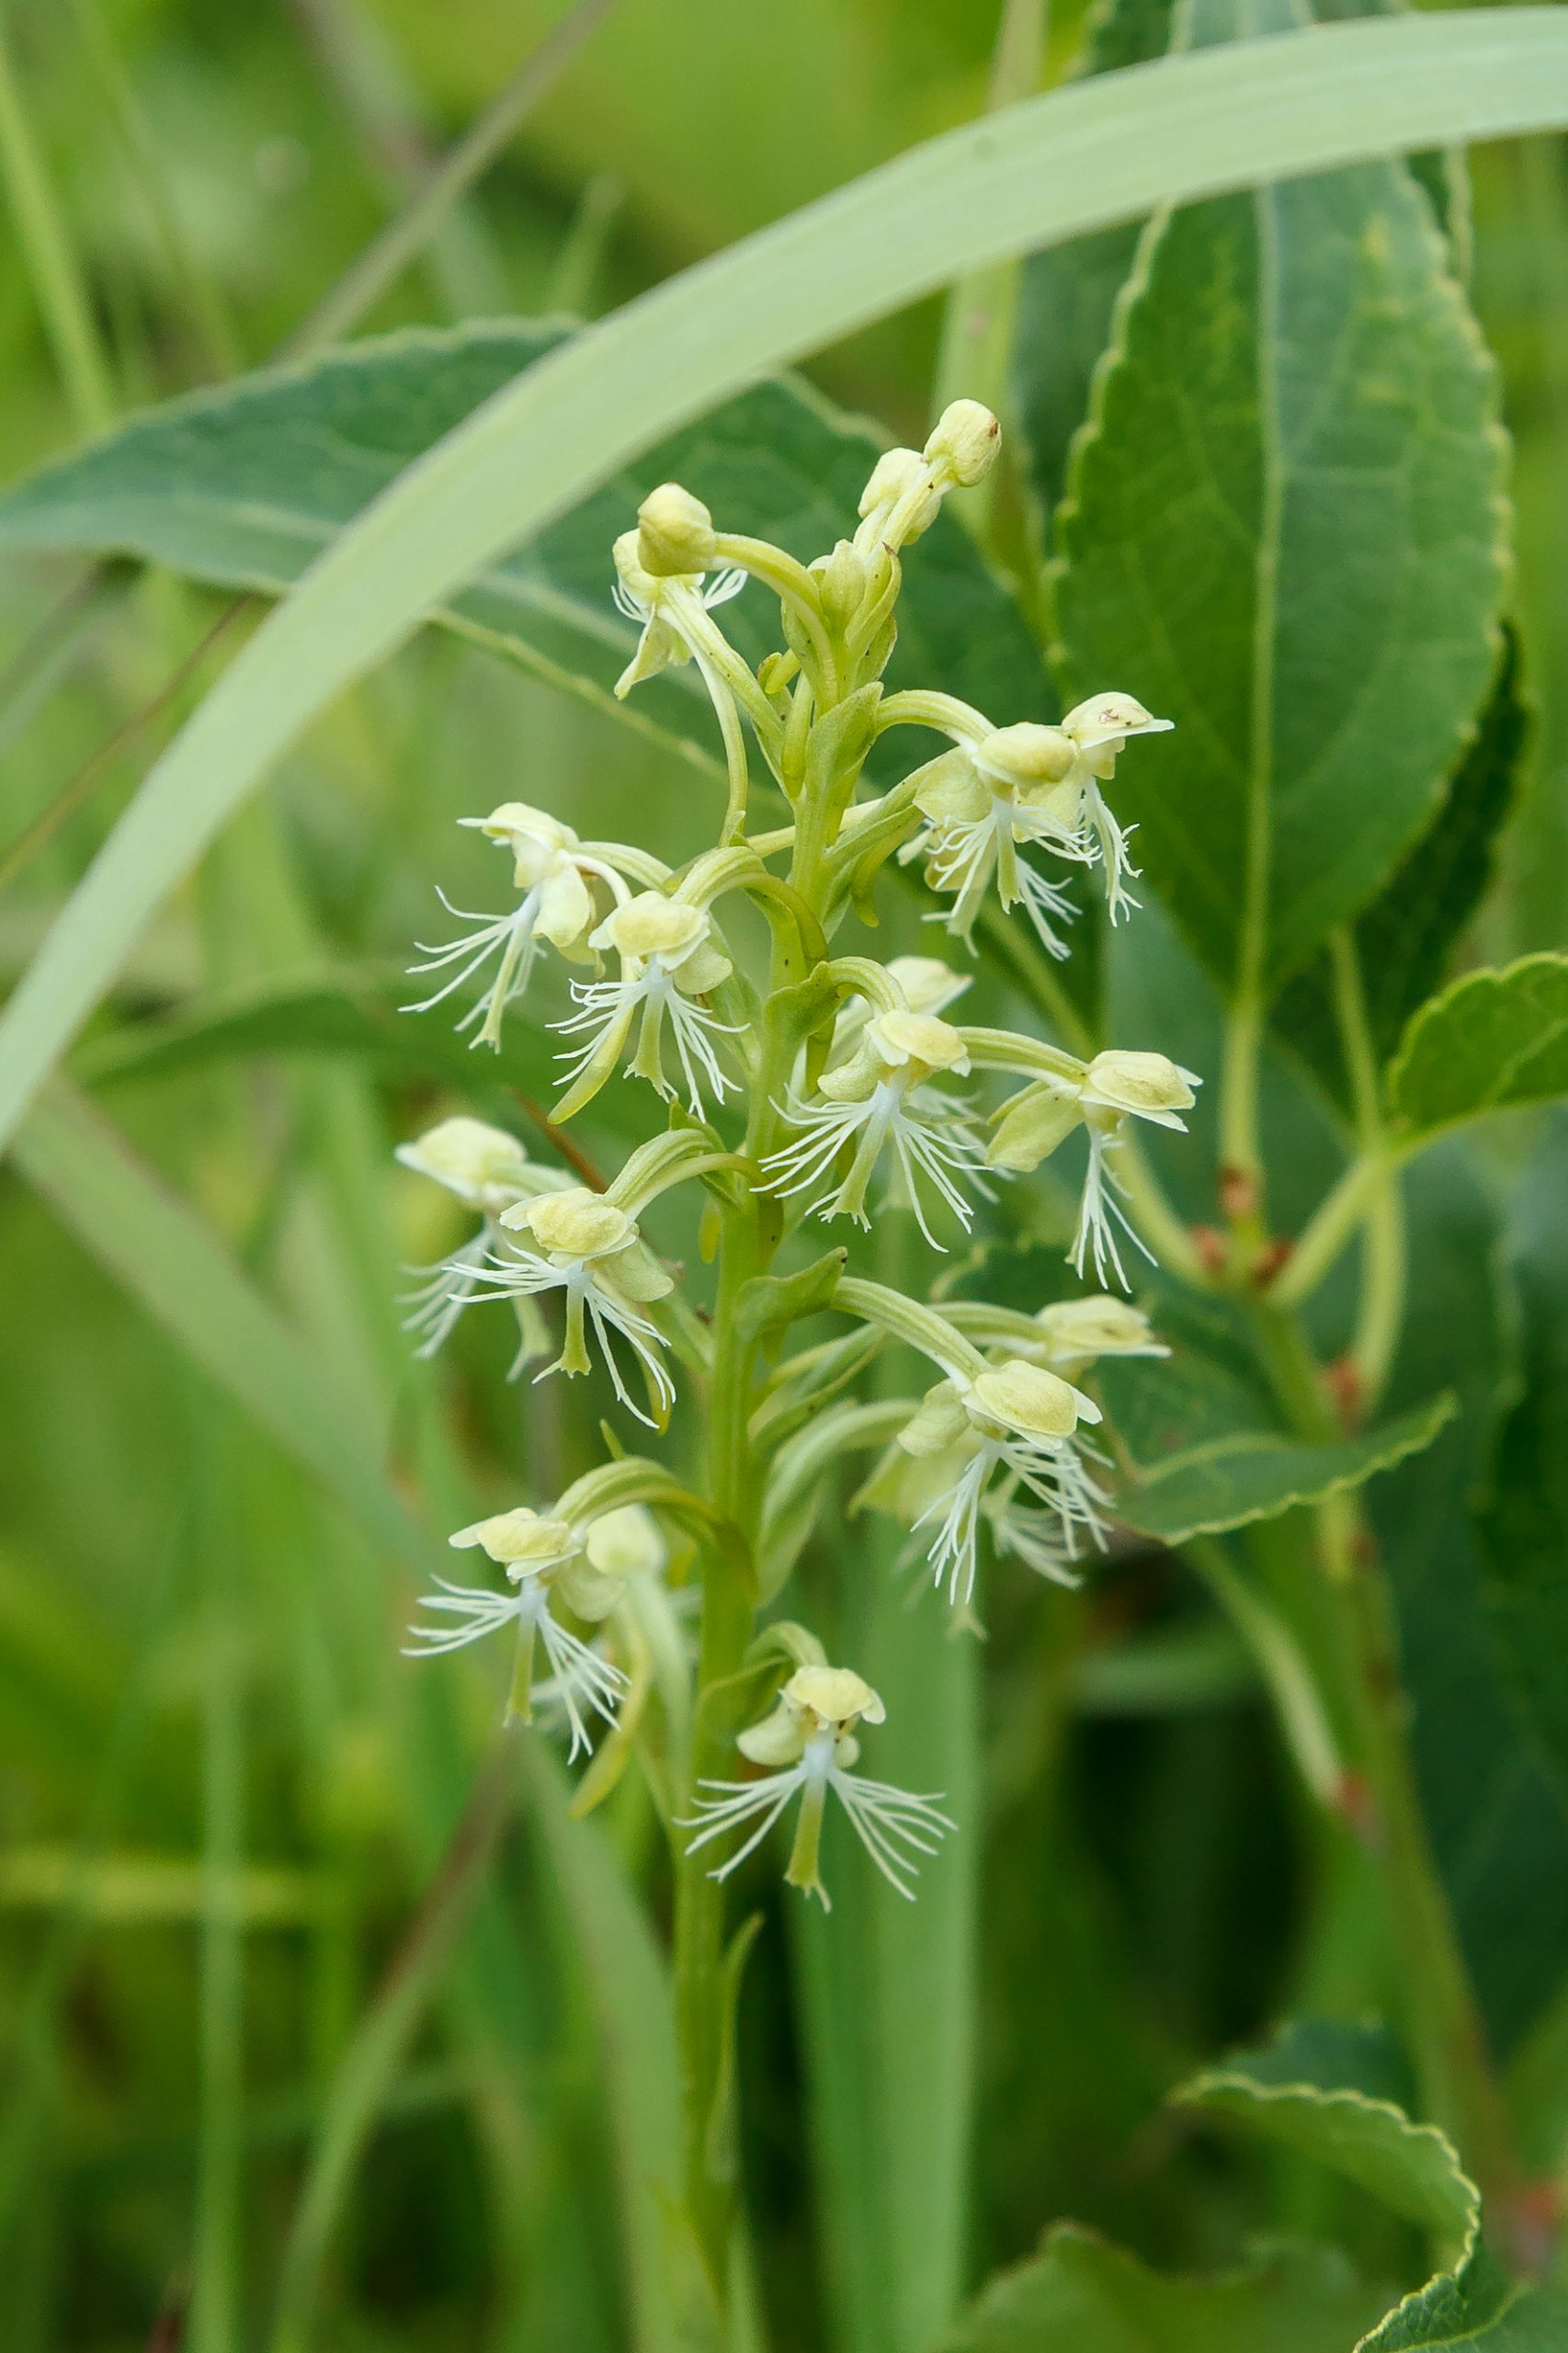 Platanthera lacera is one of six Platanthera species in Longwood’s Pennsylvania native orchid conservation program. It is a rare plant that is on the conservation watch list for Pennsylvania. Photo: courtesy of Longwood Gardens.